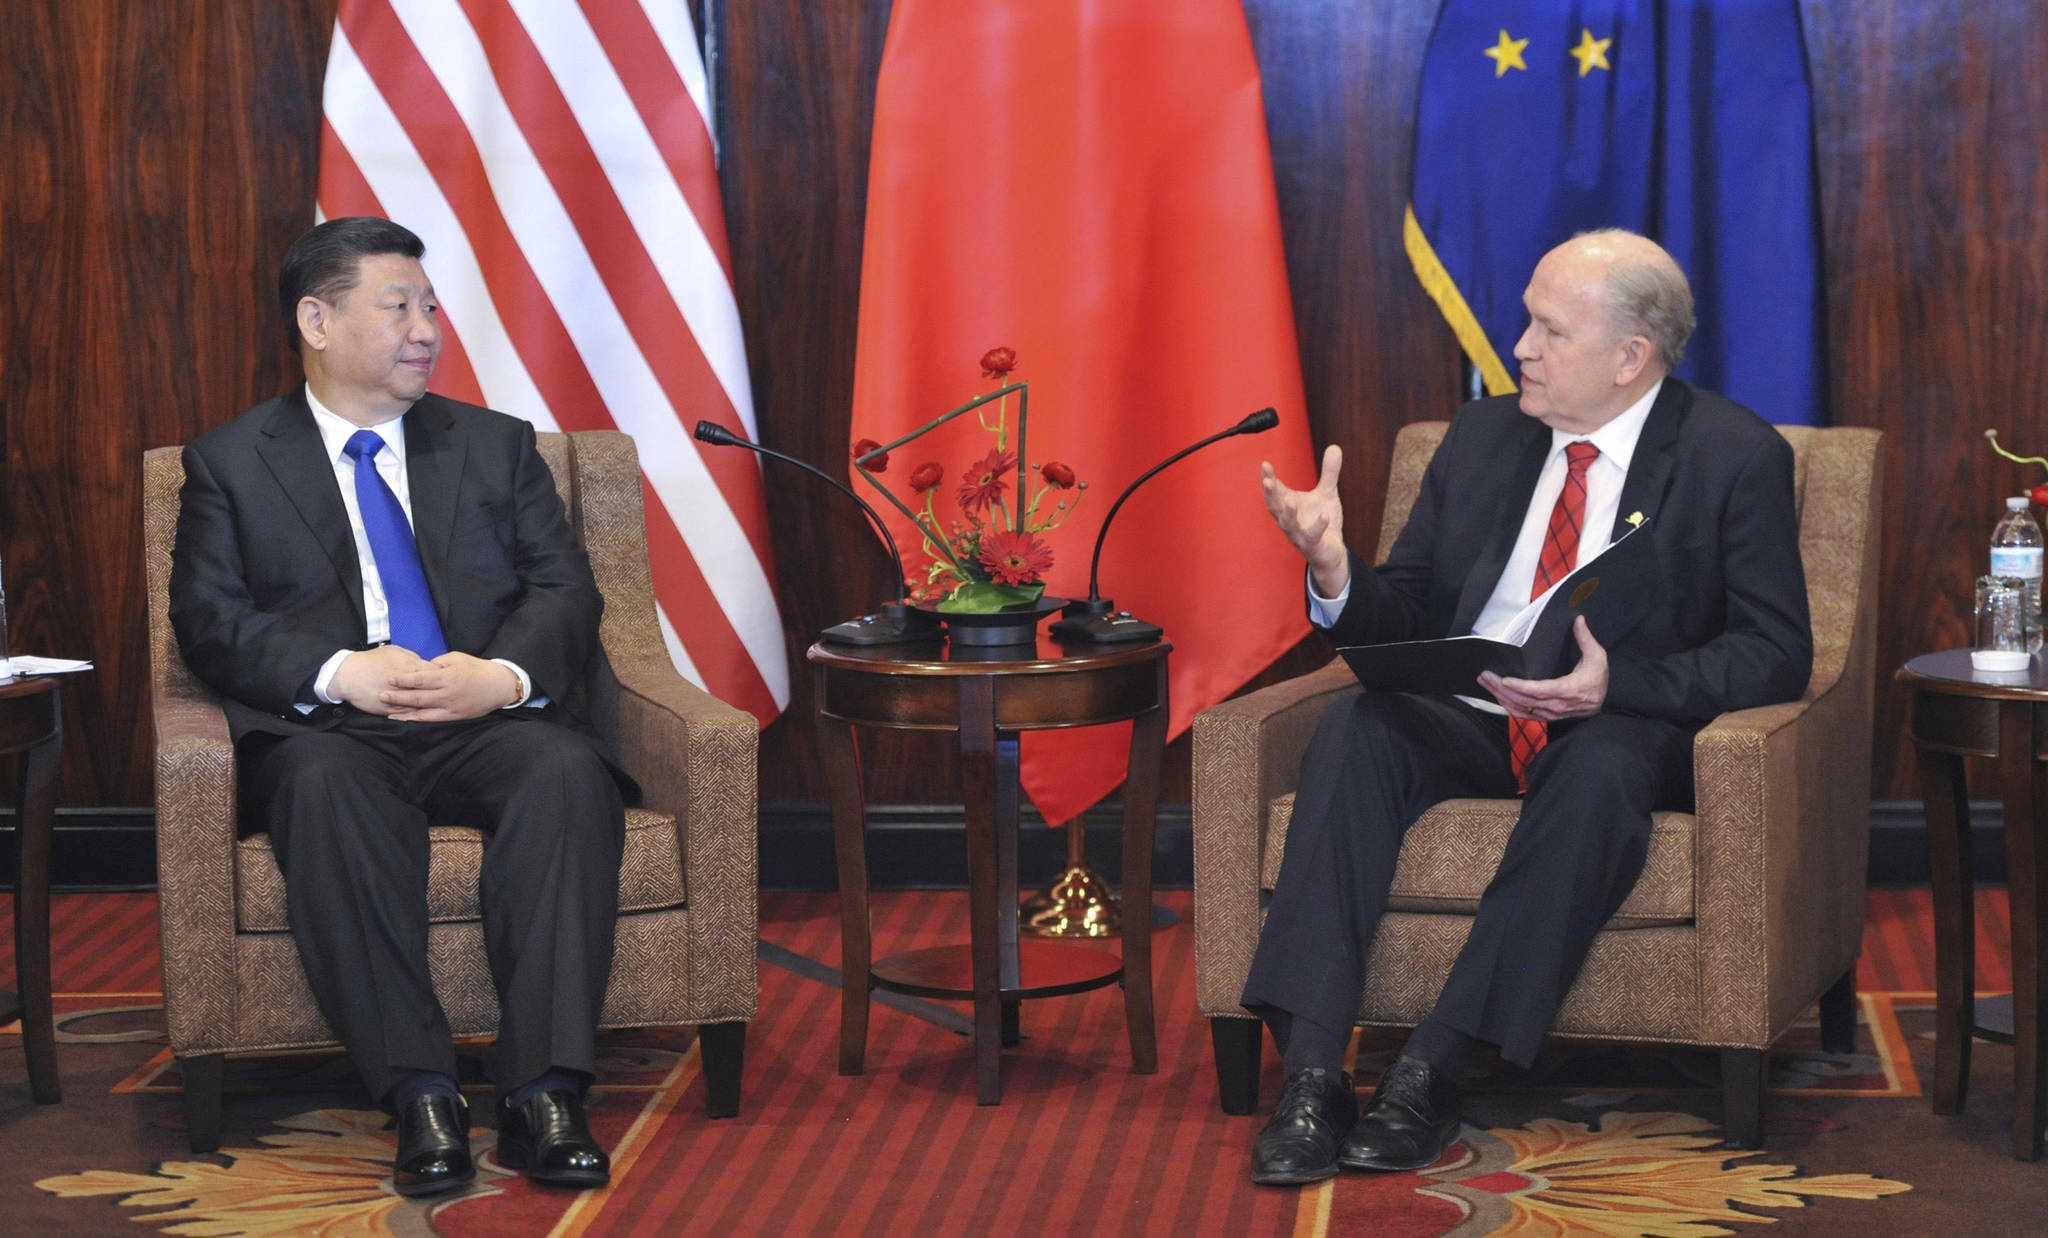 Chinese President Xi Jinping, left, listens to Alaska Governor Bill Walker at a meeting Friday April 7, 2017, in Anchorage, Alaska. Xi requested time with Gov. Walker Friday night as the Chinese delegation’s plane made a refueling stop in Alaska’s largest city following meetings with President Donald Trump in Florida. (AP Photo/Michael Dinneen)